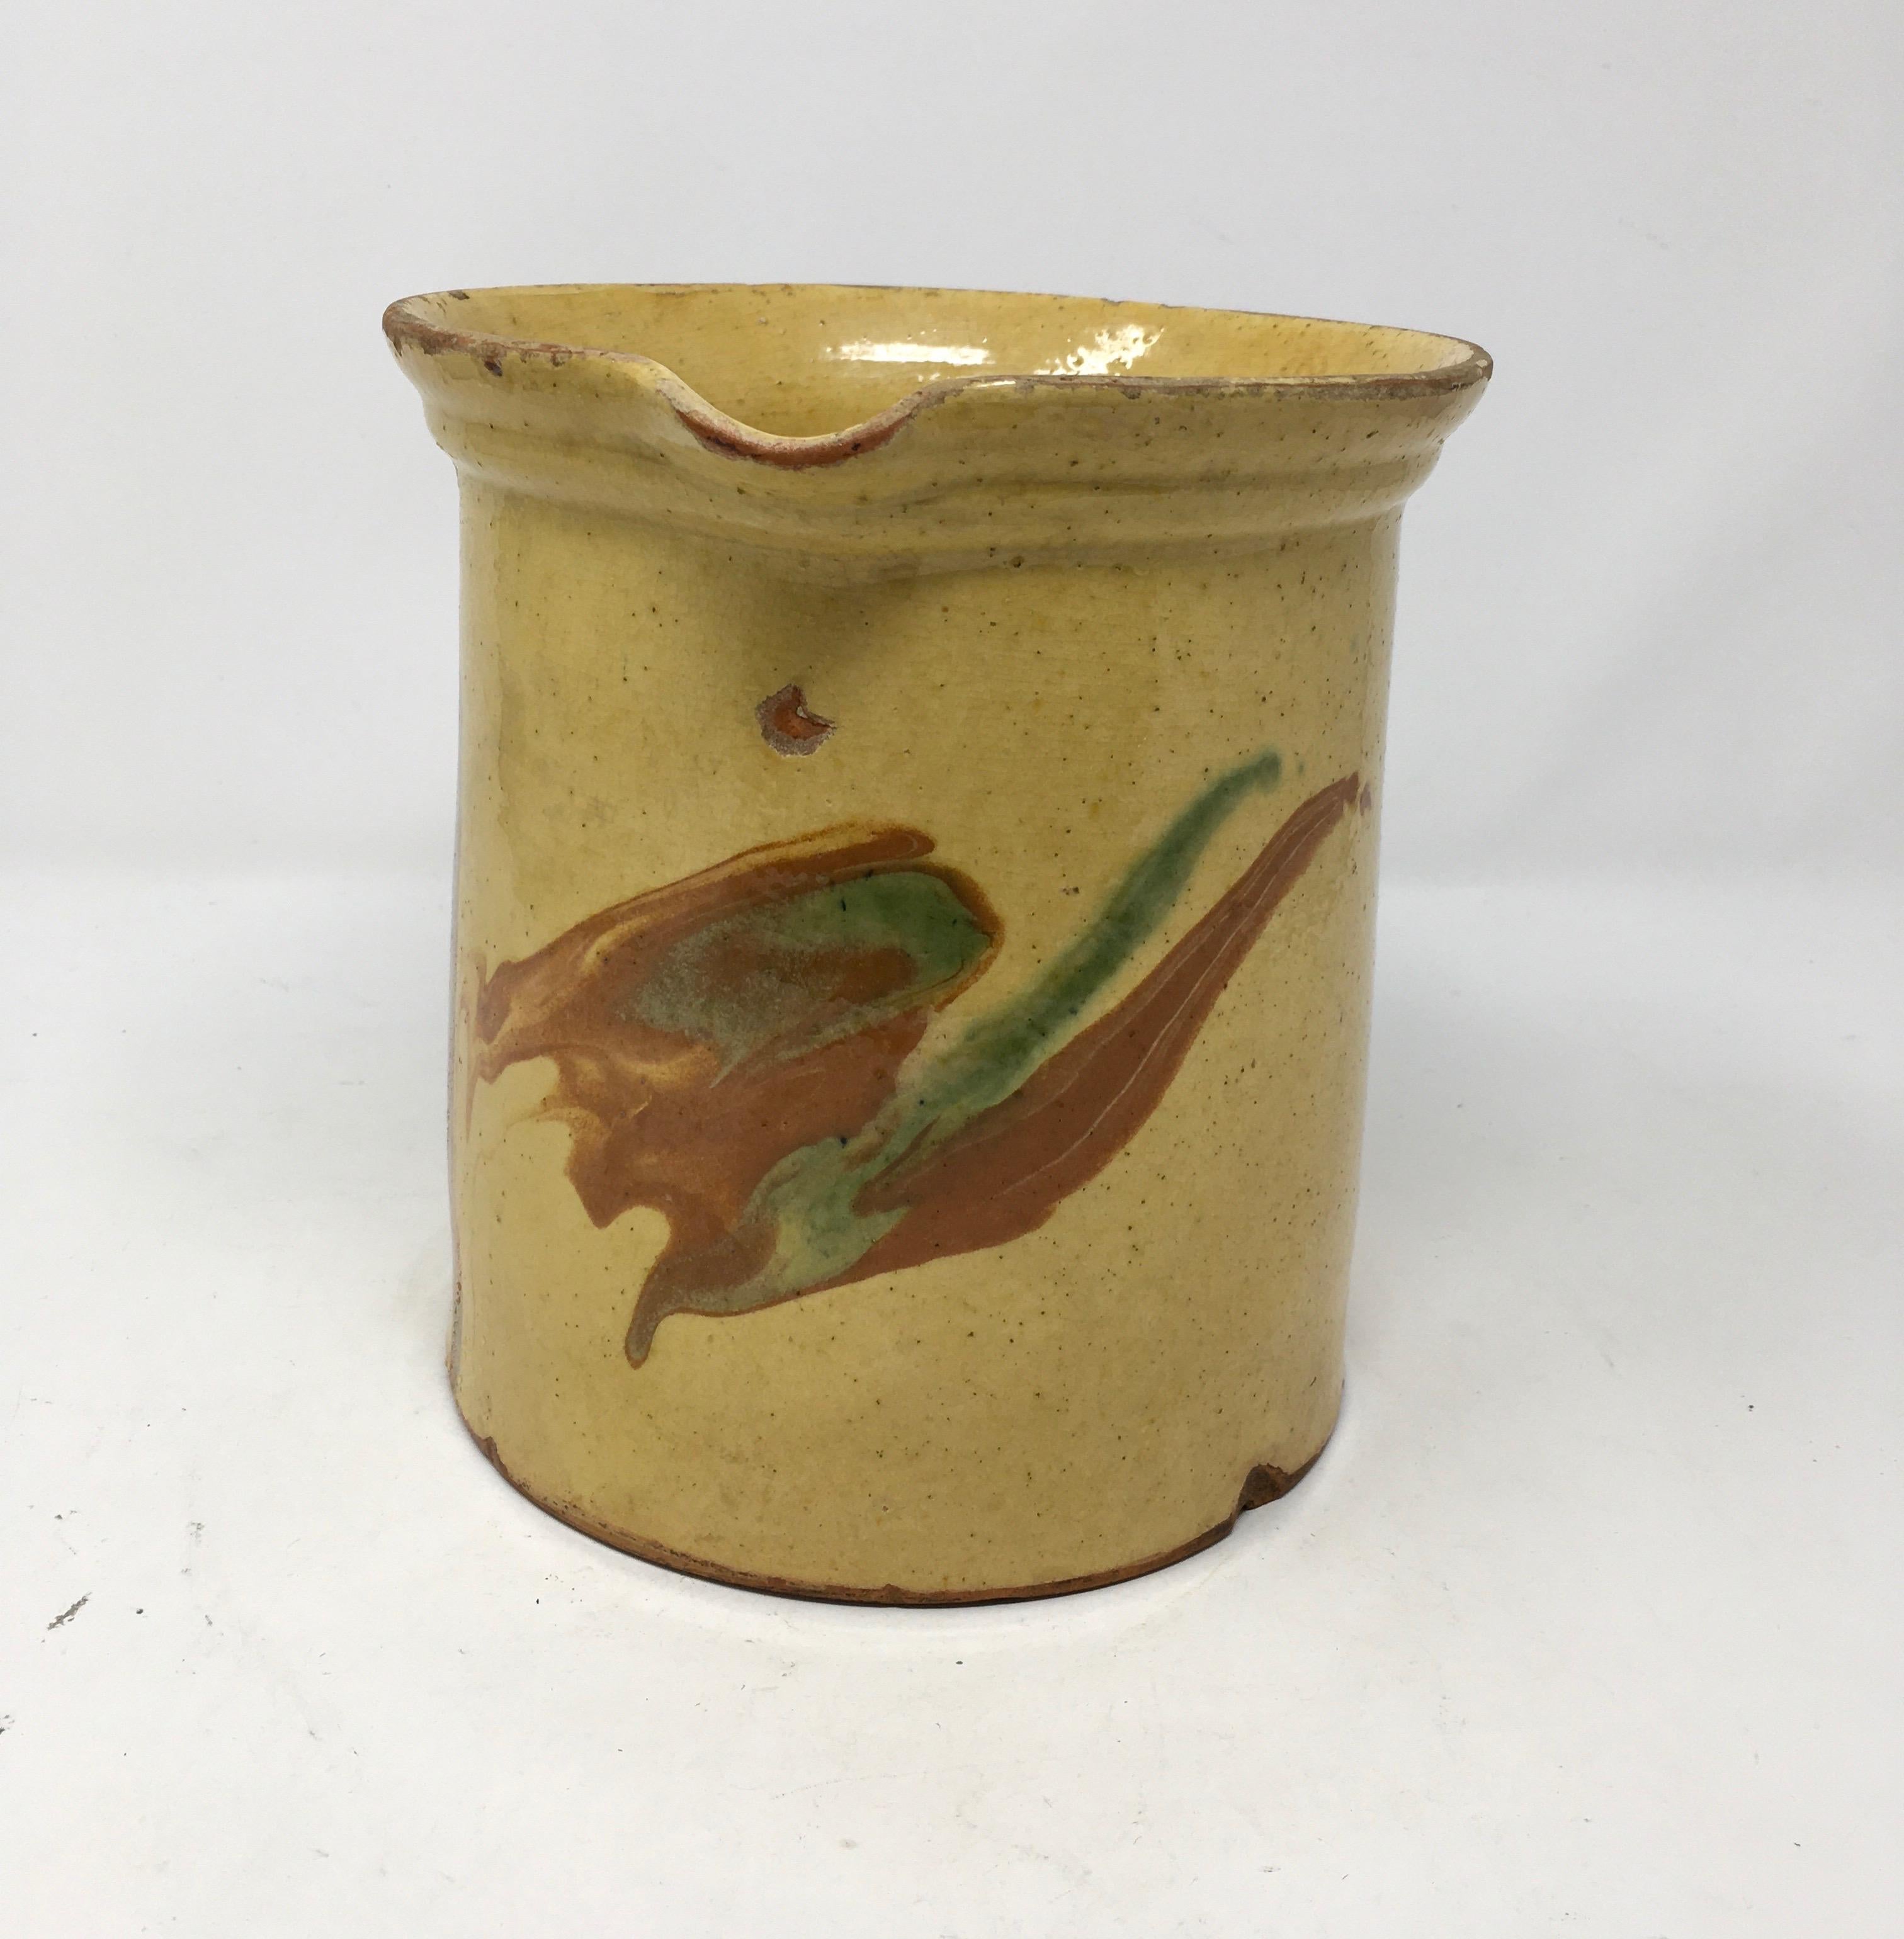 This colorful pitcher has has a wide mouth and a small spout. It is decorated with green and terracotta color glazed swatches. It would also be lovely filled with flowers. It is in good condition with some small chips around the mouth and